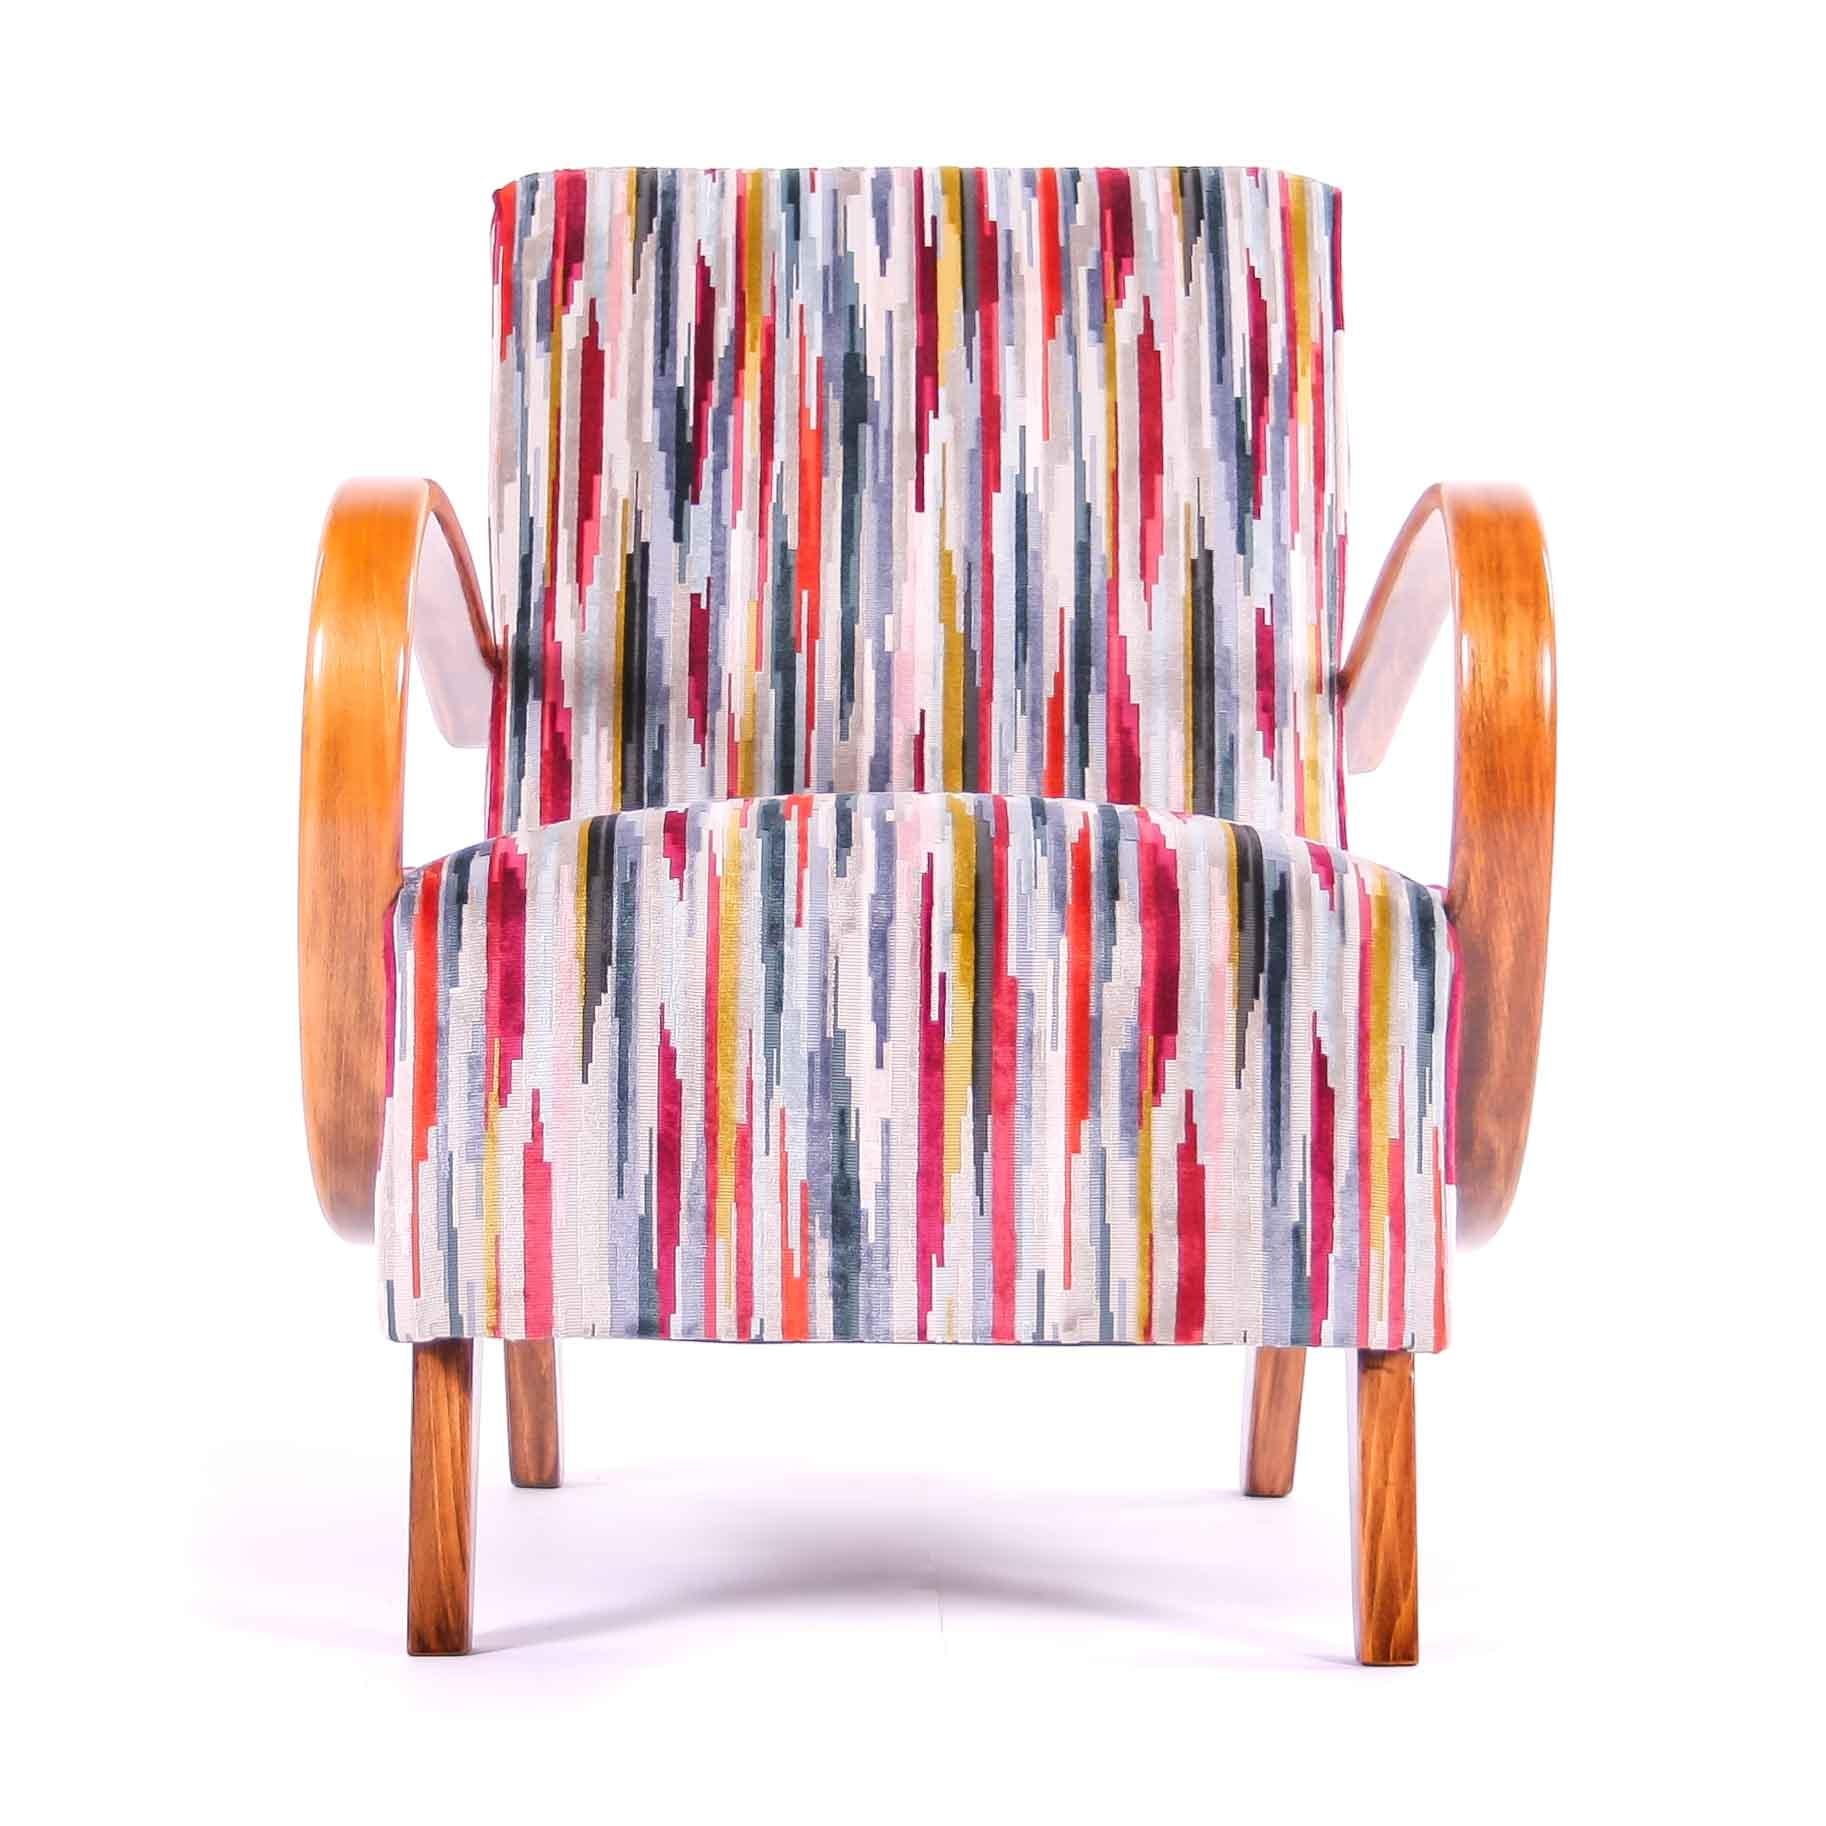 Original piece of furniture after renovation.
A very comfortable and practical chair that finds space in any space. Precise refurbishment and the highest quality materials guarantee long-term durability of the chair. The bold pattern of upholstery